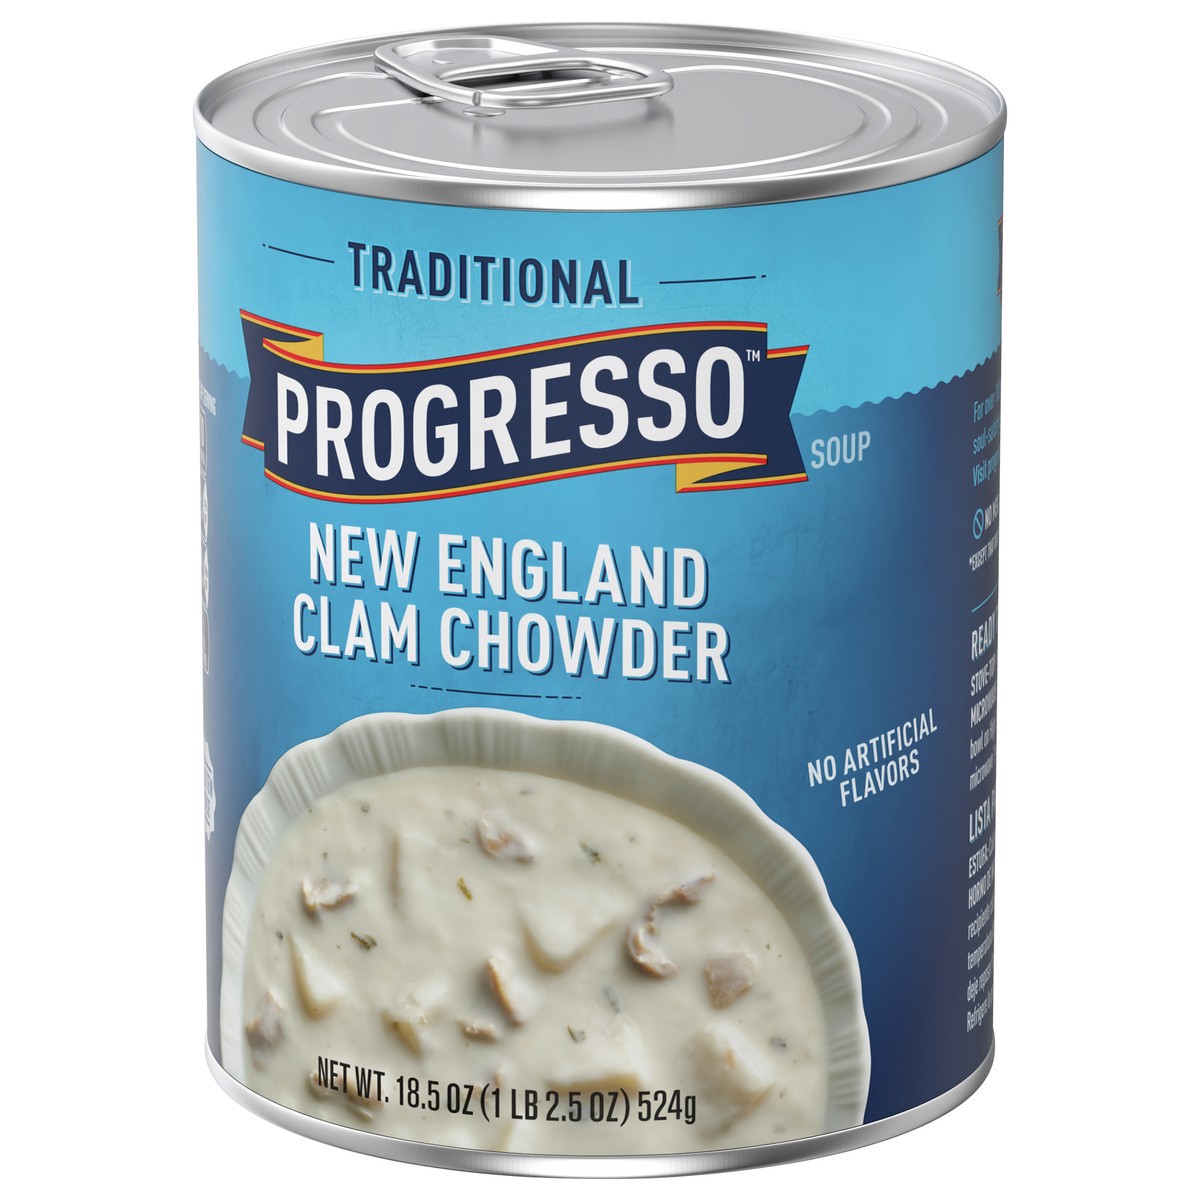 slide 3 of 12, Progresso New England Clam Chowder Soup, Traditional Canned Soup, Gluten Free, 18.5 oz, 18.5 oz